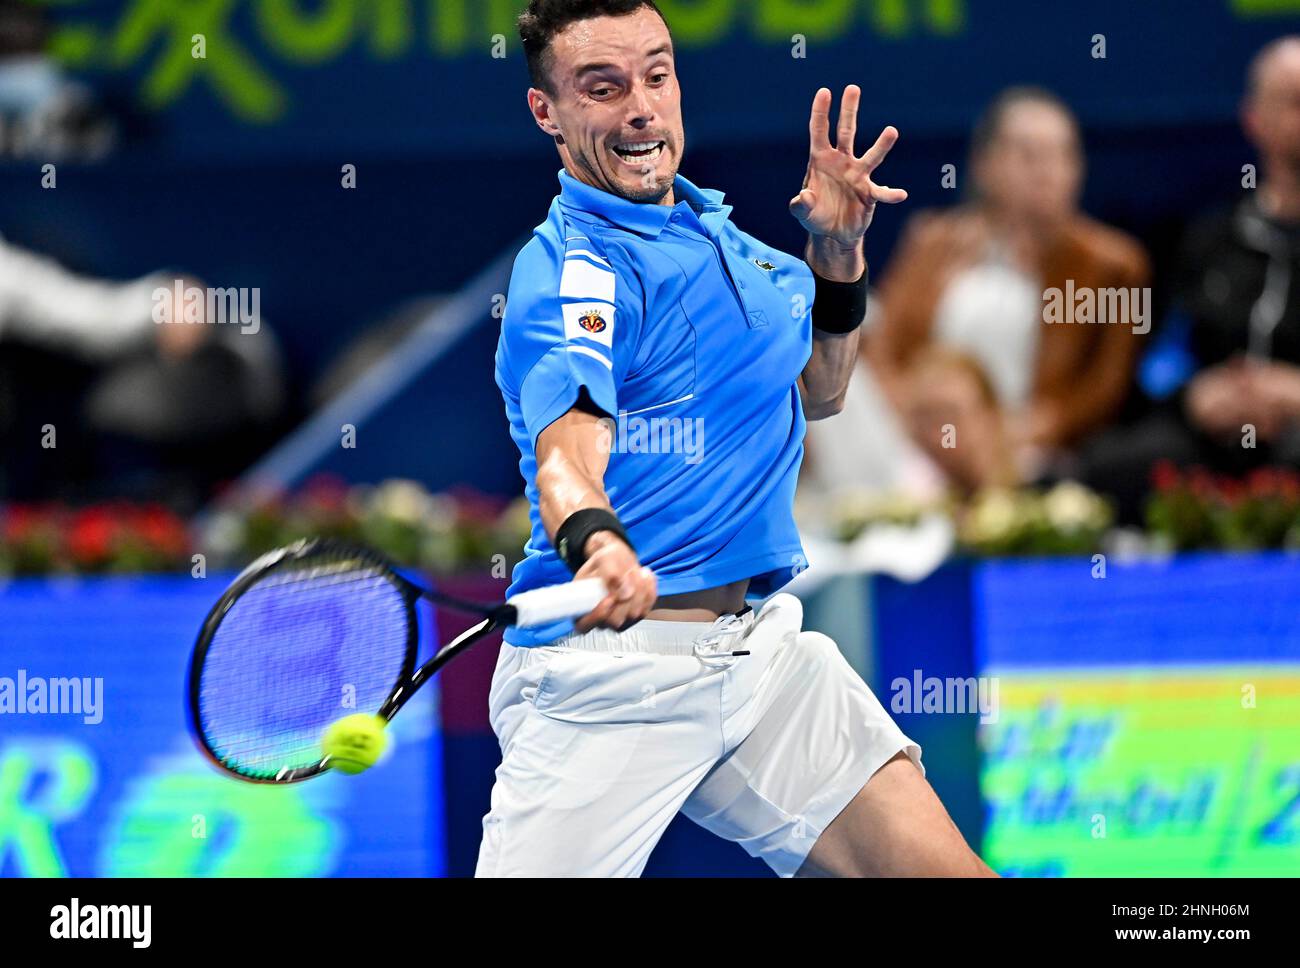 Doha, Qatar. 16th Feb, 2022. Roberto Bautista Agut of Spain returns the  ball during the second round of ATP Qatar Open Tennis match against Andy  Murray of Great Britain at the Khalifa